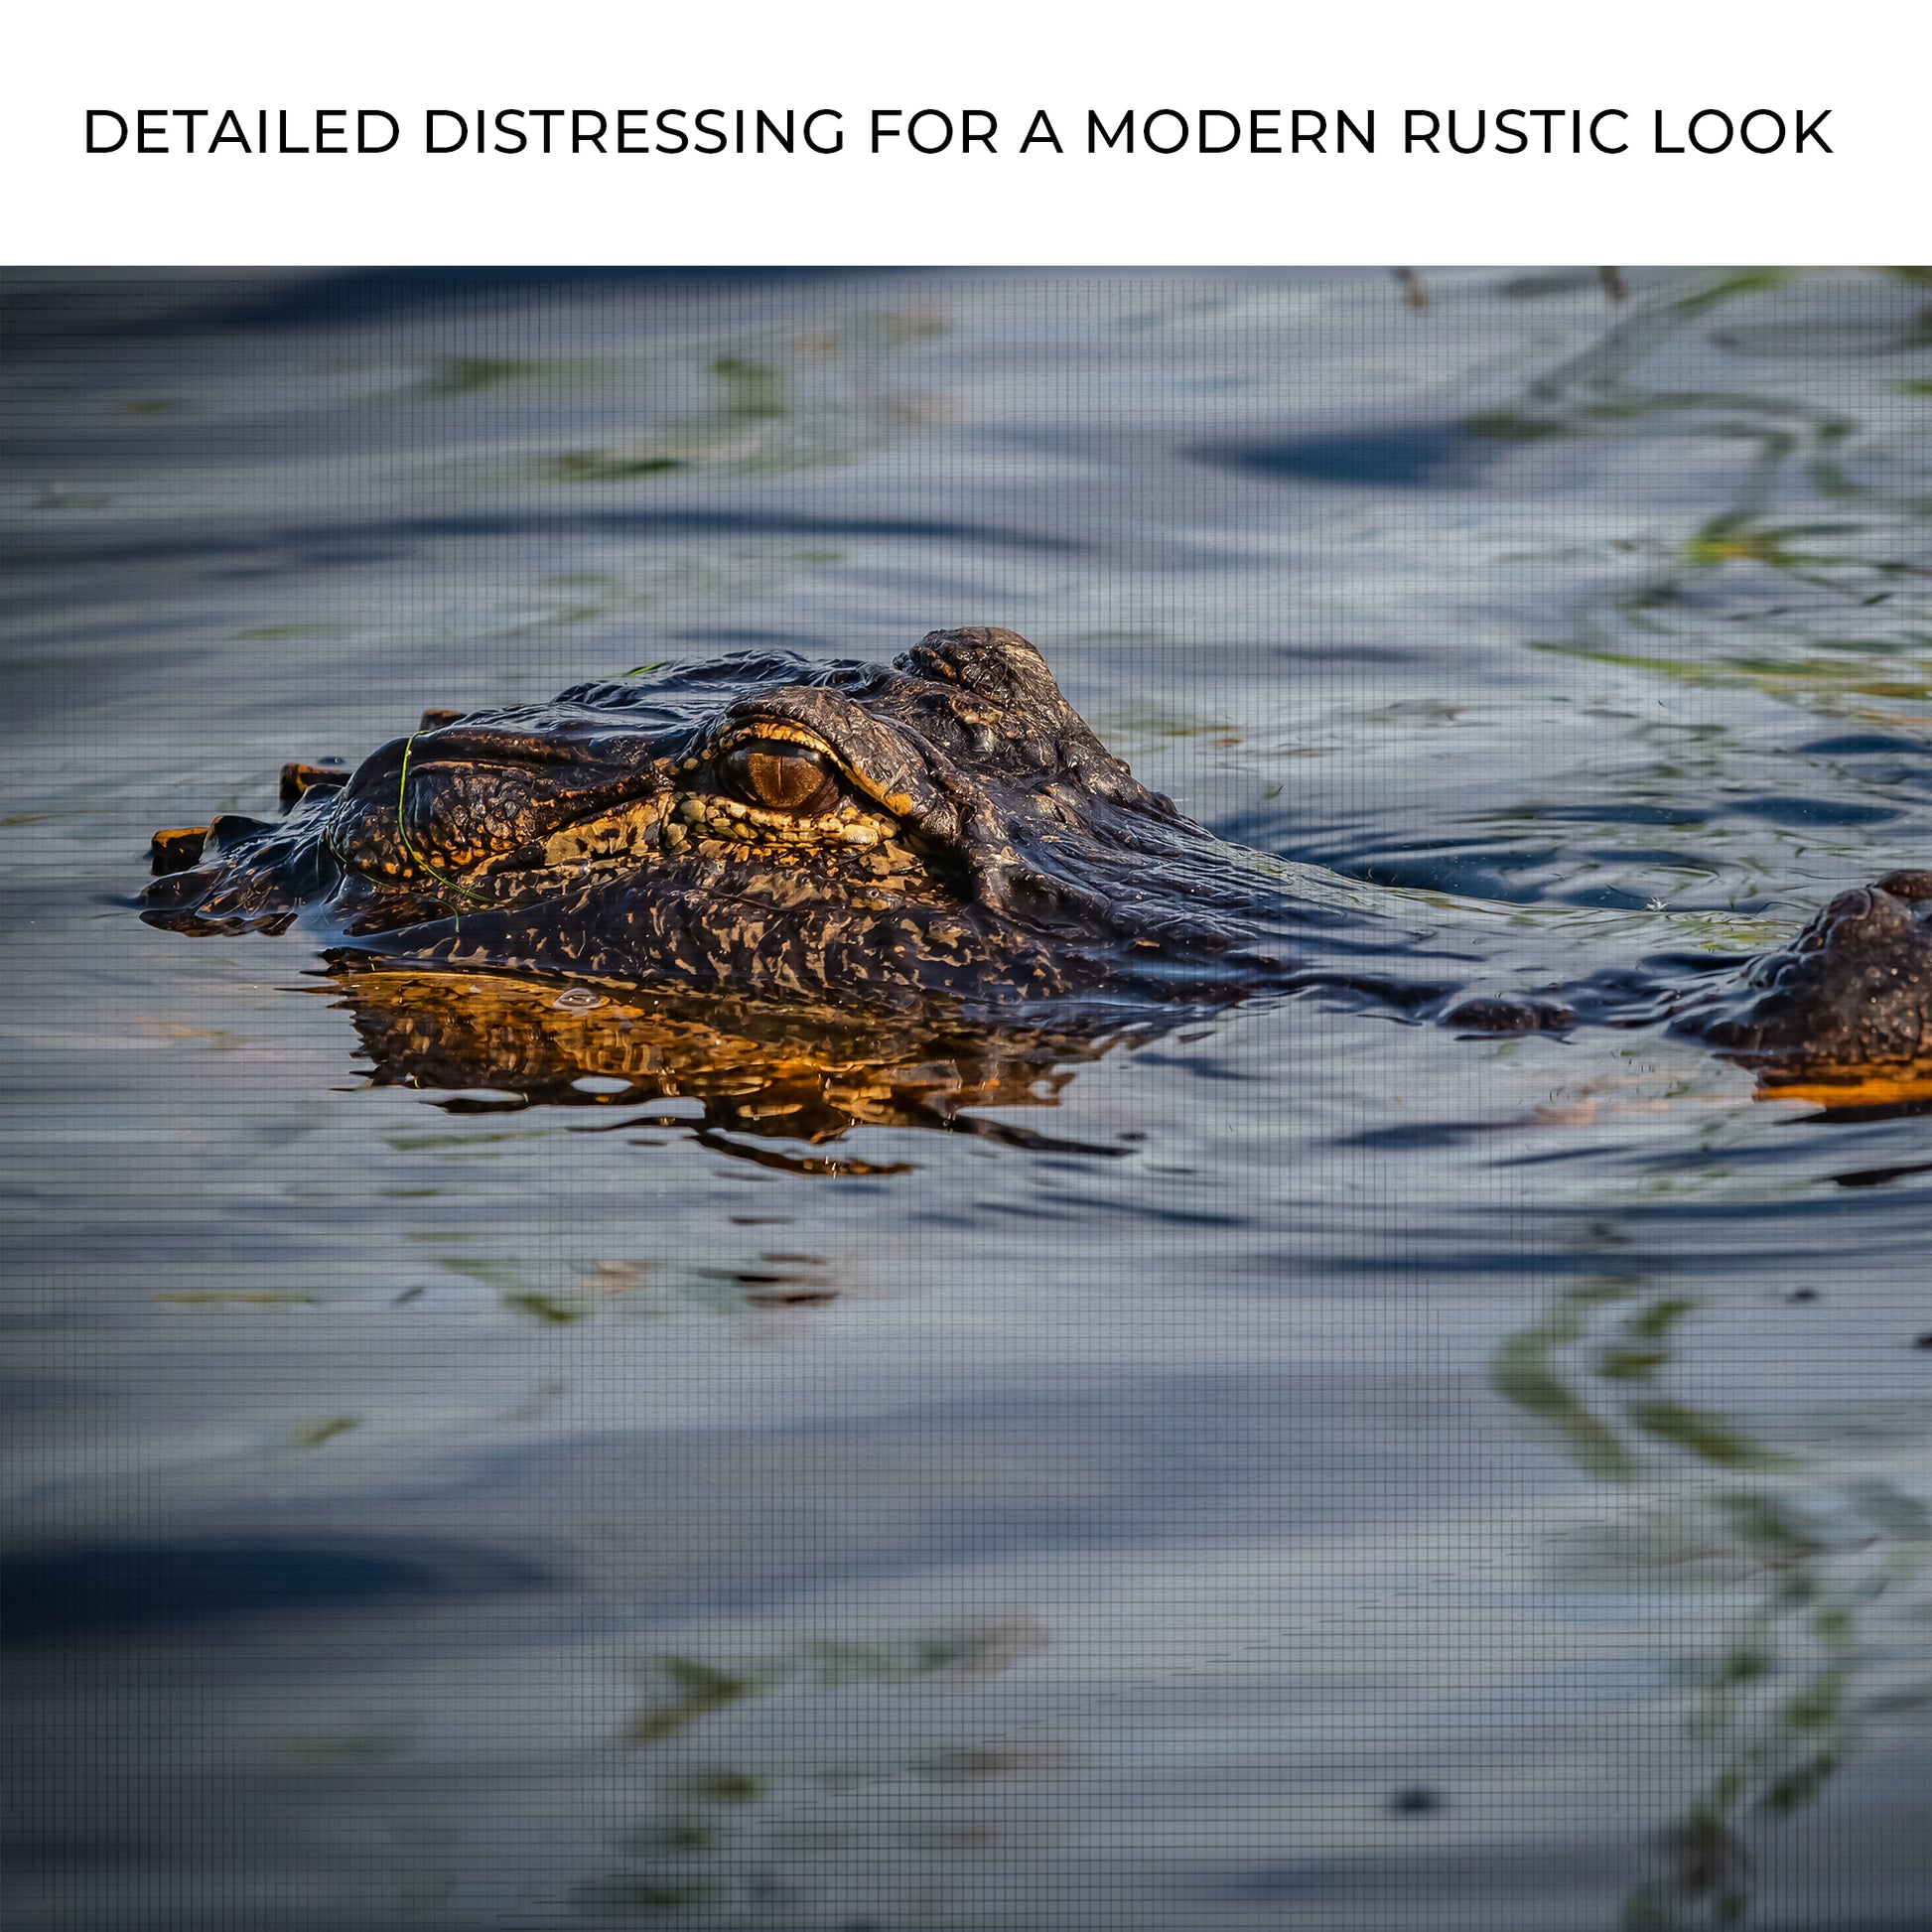 Reptile Alligator Peeking Canvas Wall Art Zoom - Image by Tailored Canvases